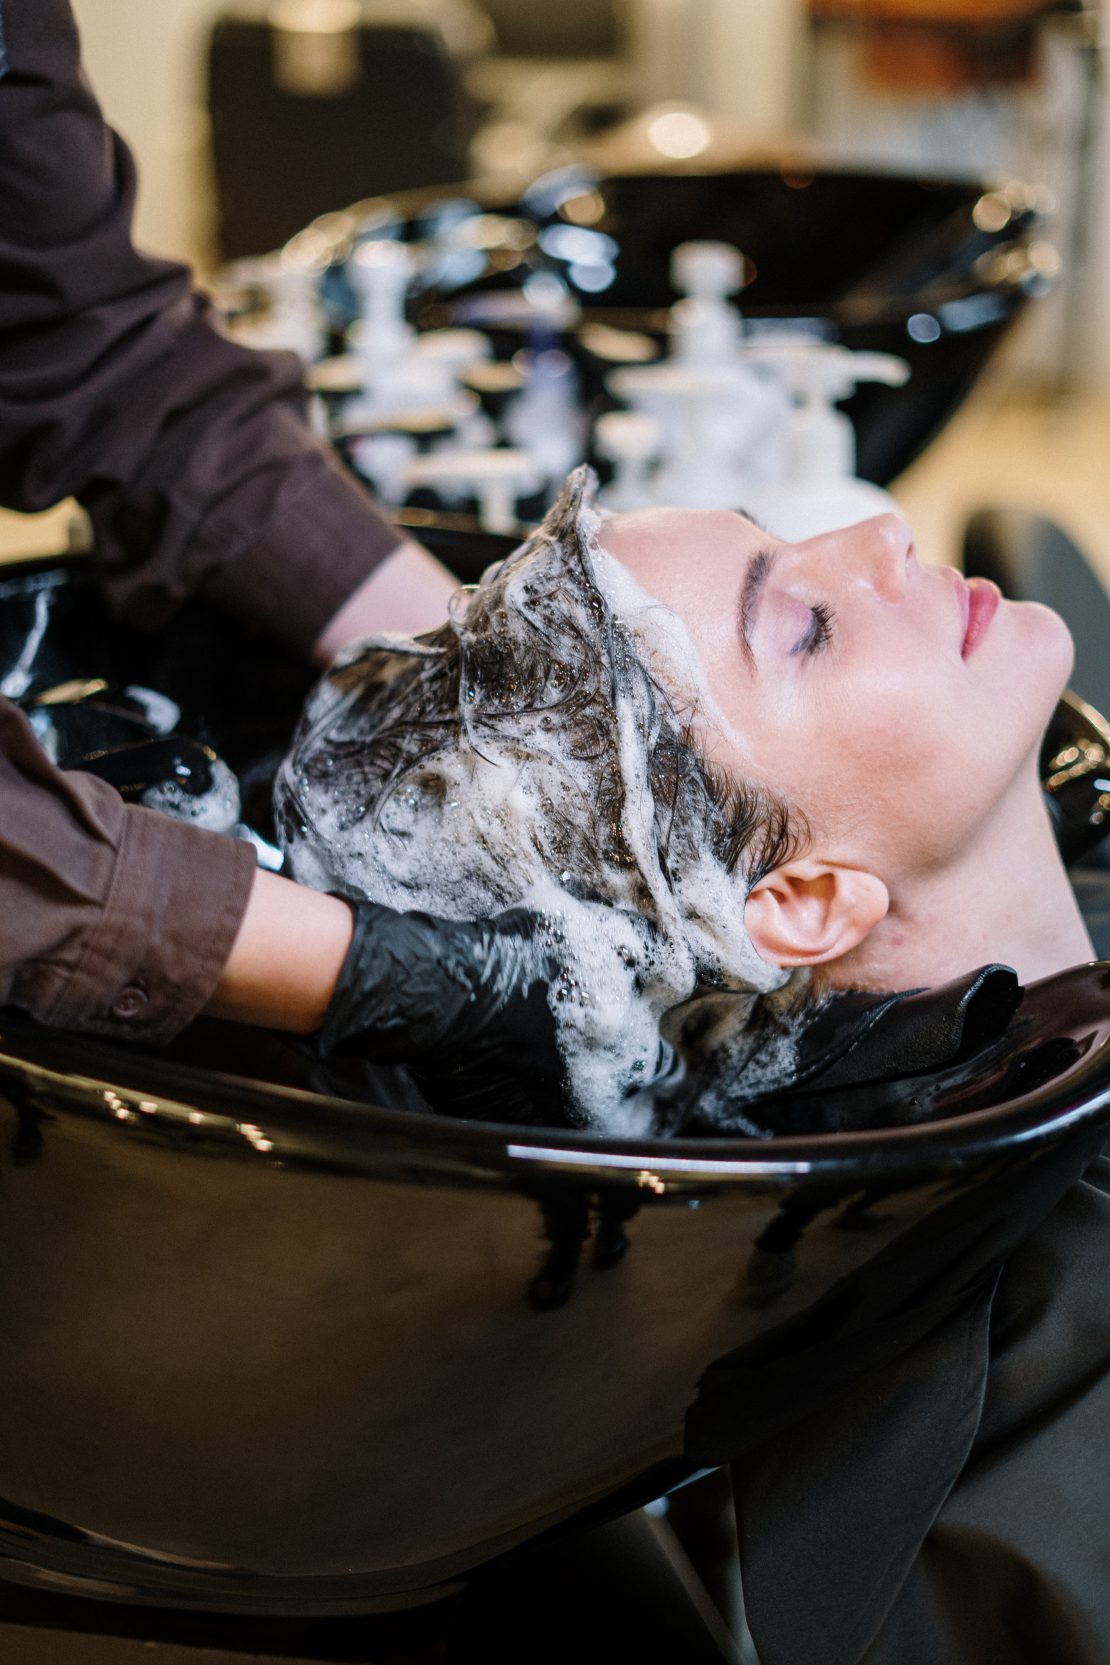 What's the Difference Between a Beautician and a Cosmetologist? Contact Health & Style Institute at 1-844-94-STYLE for more information on our cosmetology program.